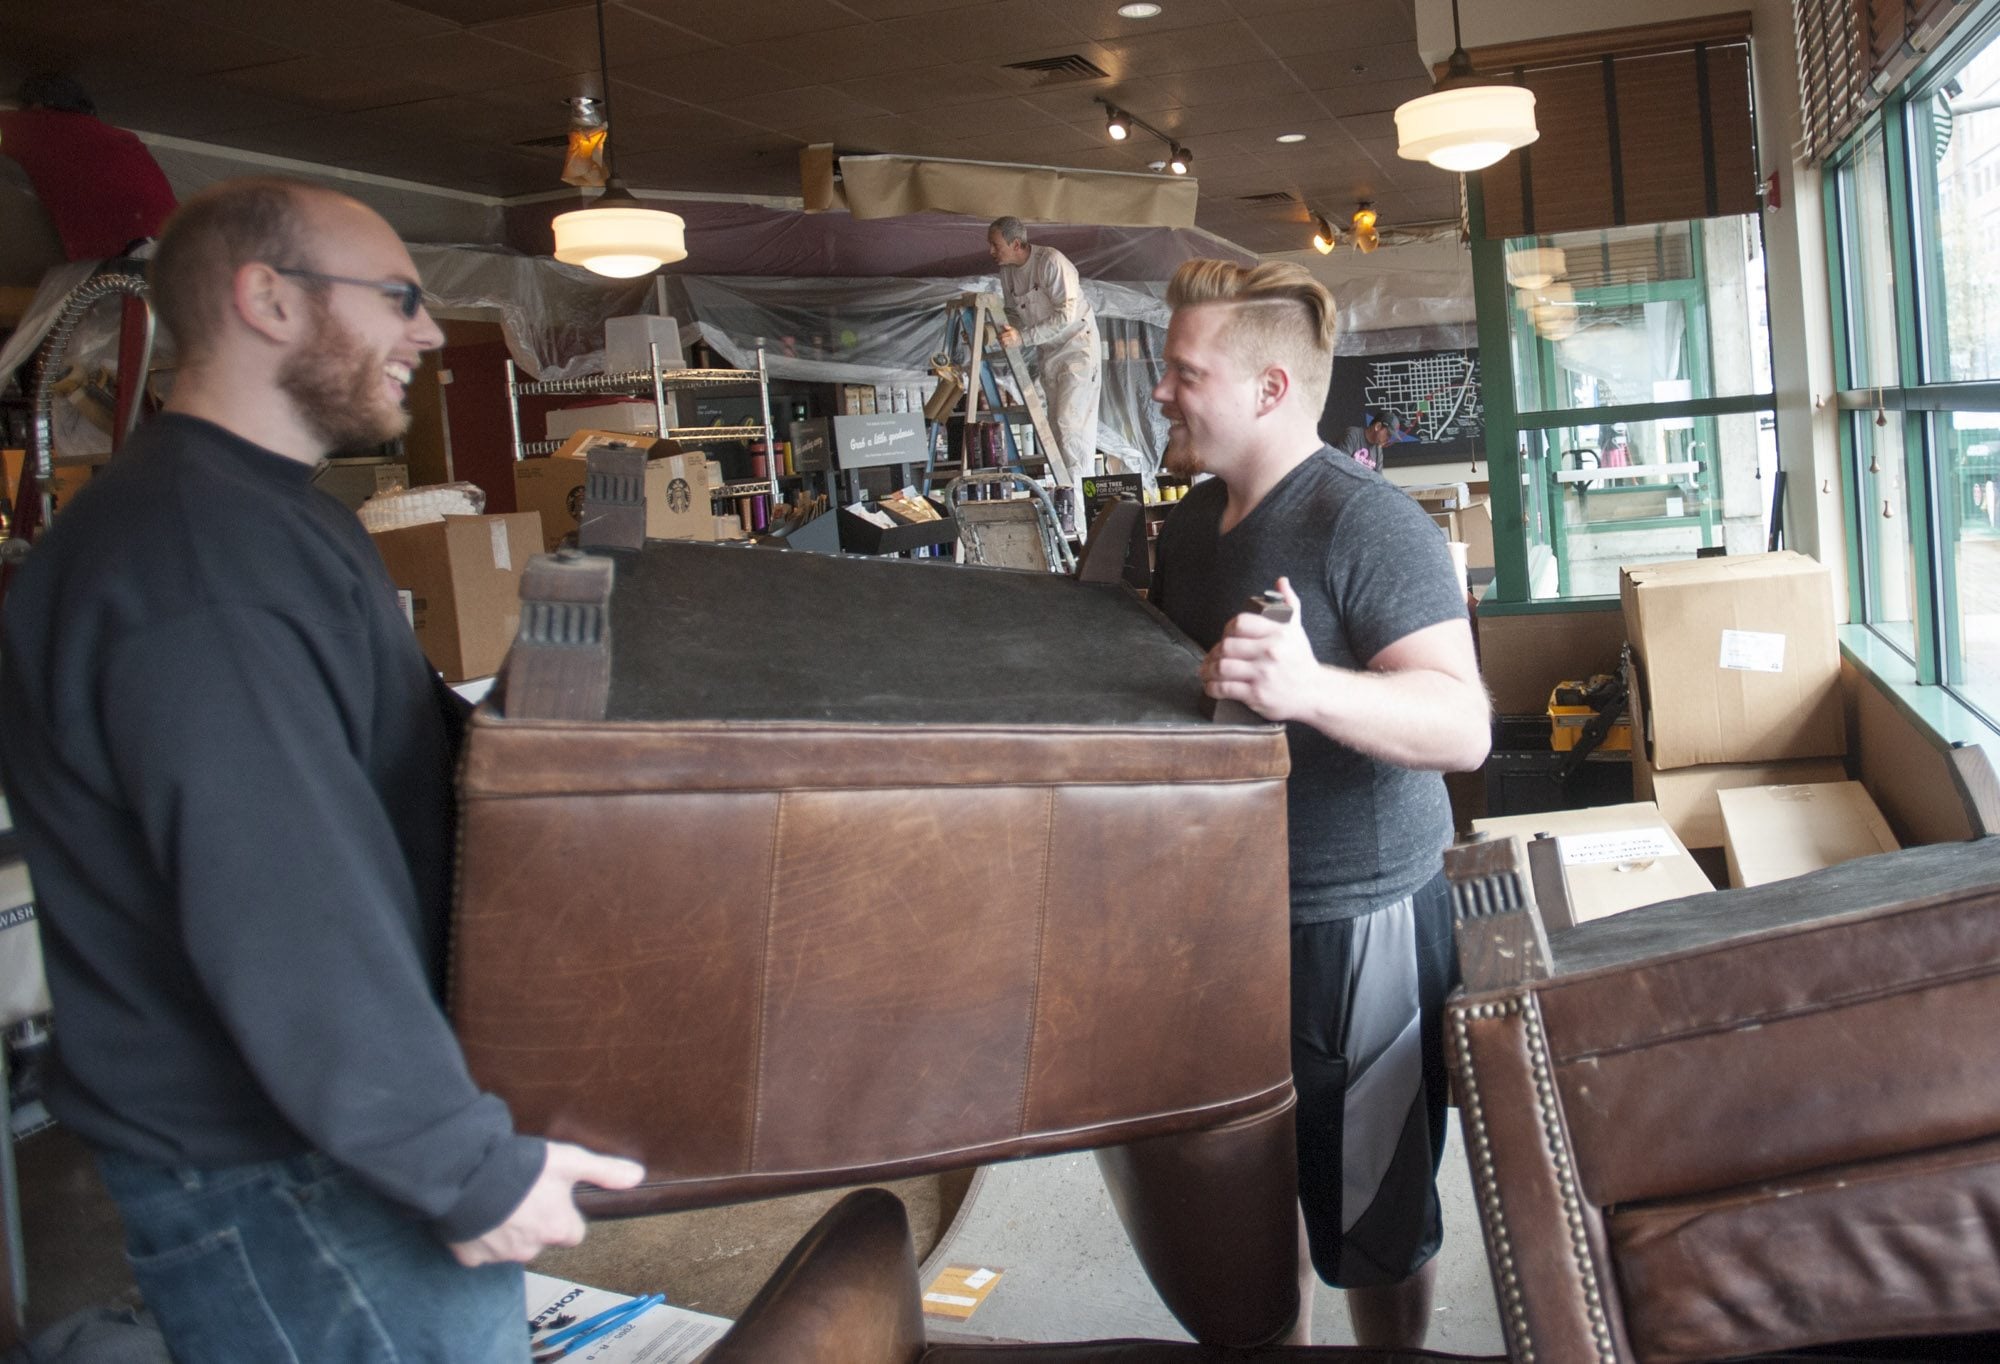 Steven Morgan, right, moves furniture with Wyatt McGehee as remodeling takes place at the Starbucks near Esther Short Park in Vancouver on Monday.